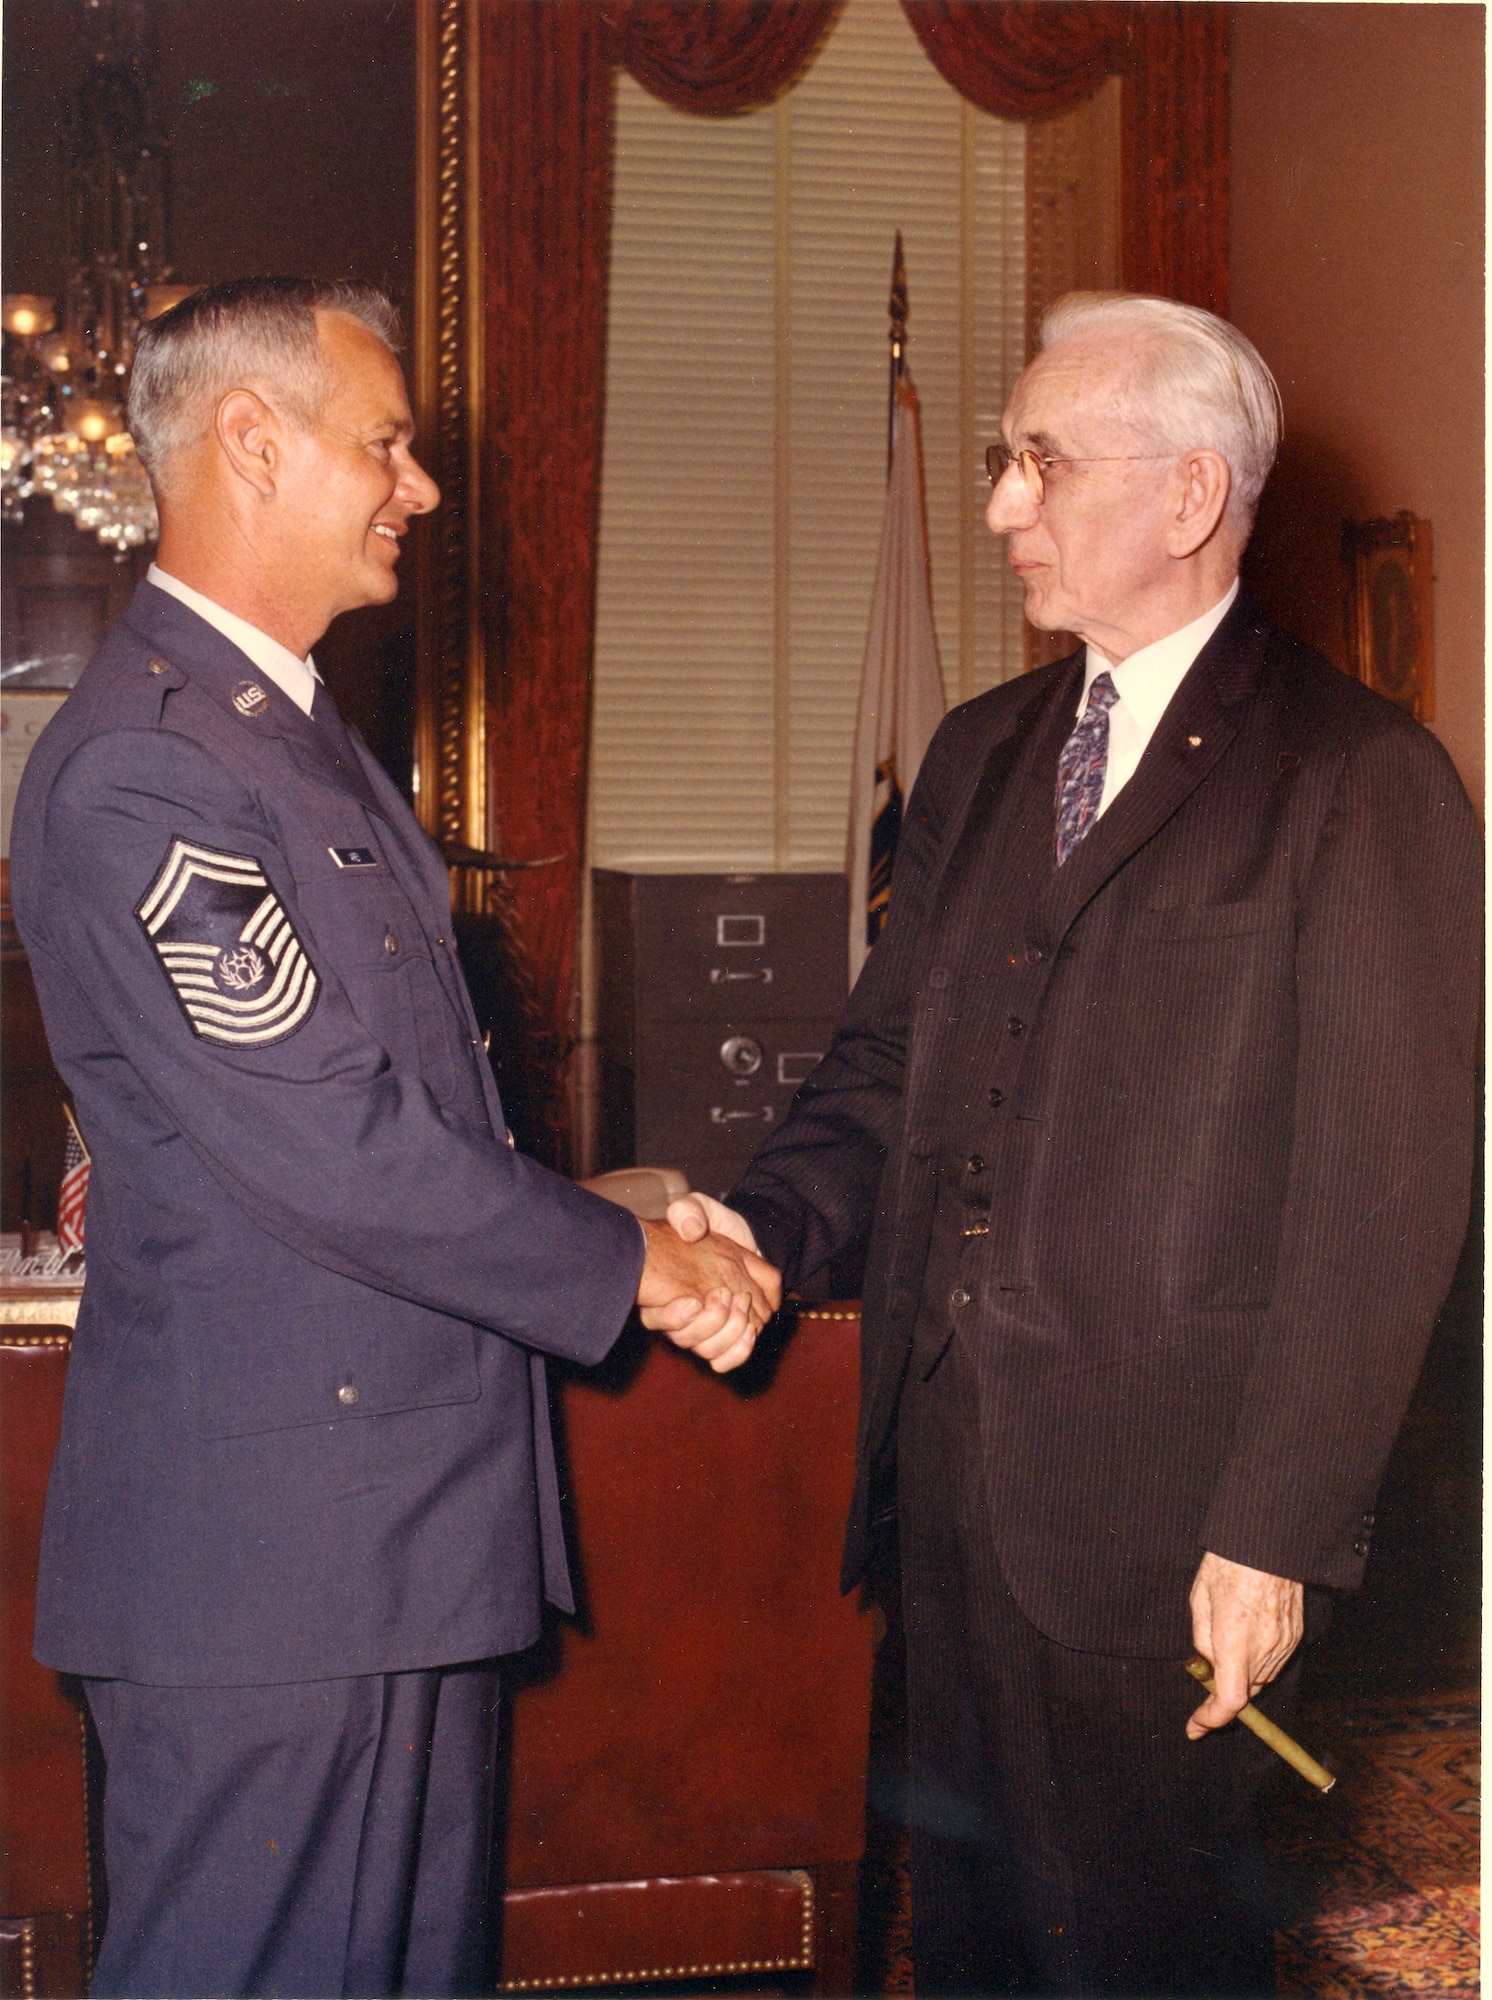 Chief Master Sgt. Paul Airey, being congratulated by Massachusetts Congressman John W. McCormack, was selected as the first chief master sergeant of the Air Force on April 3, 1967.  During his tenure he visited many bases and talked with many Airmen about improving conditions for the enlisted force.  (U.S. Air Force file photo)